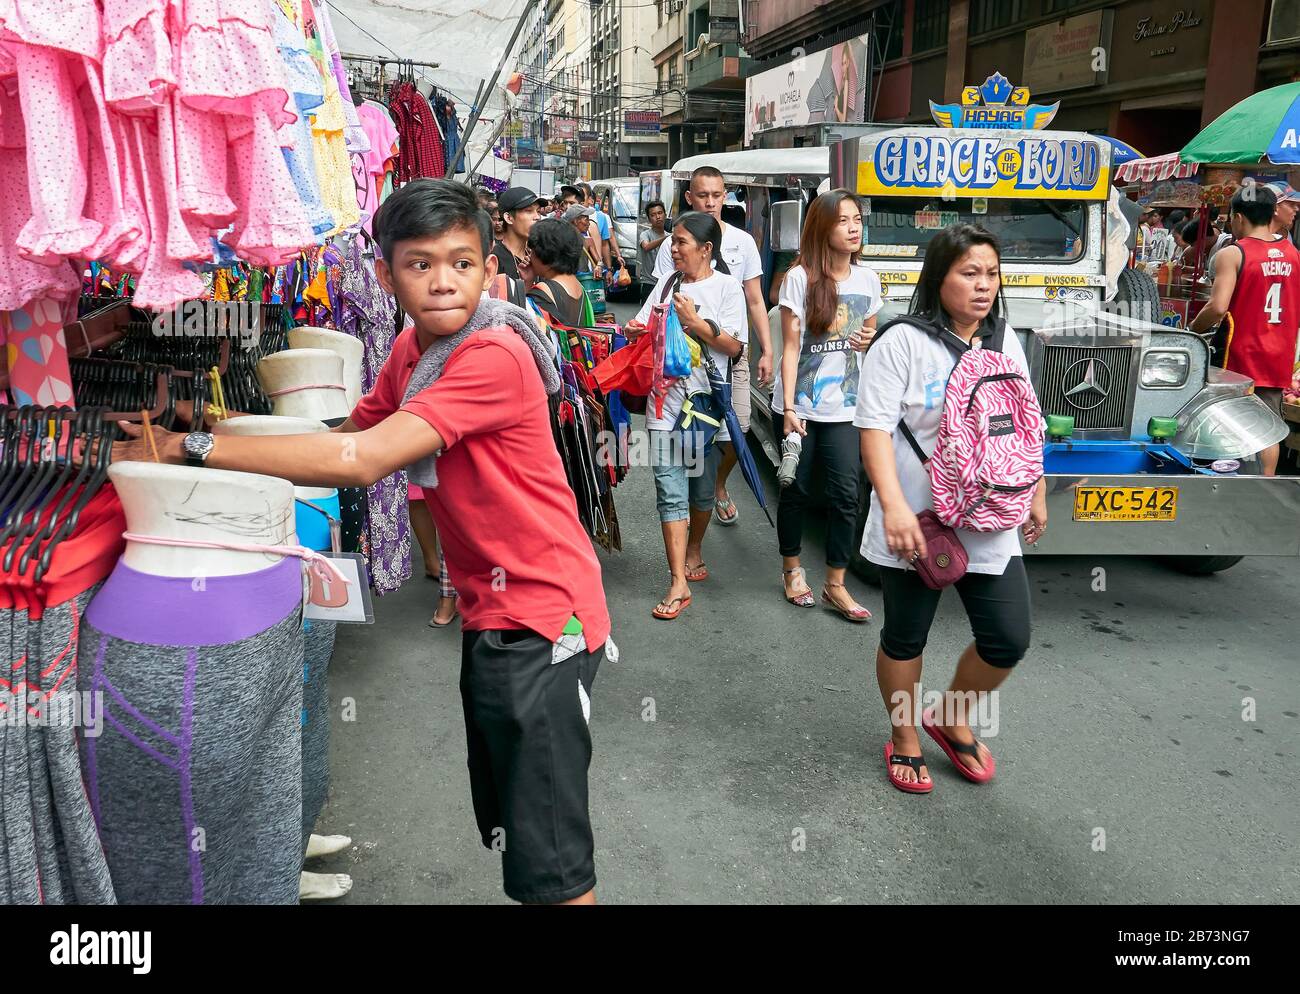 Divisoria Market, Manila, Philippines: Young boy attending a clothing store, while shoppers walking next to a Philippine jeepney Stock Photo